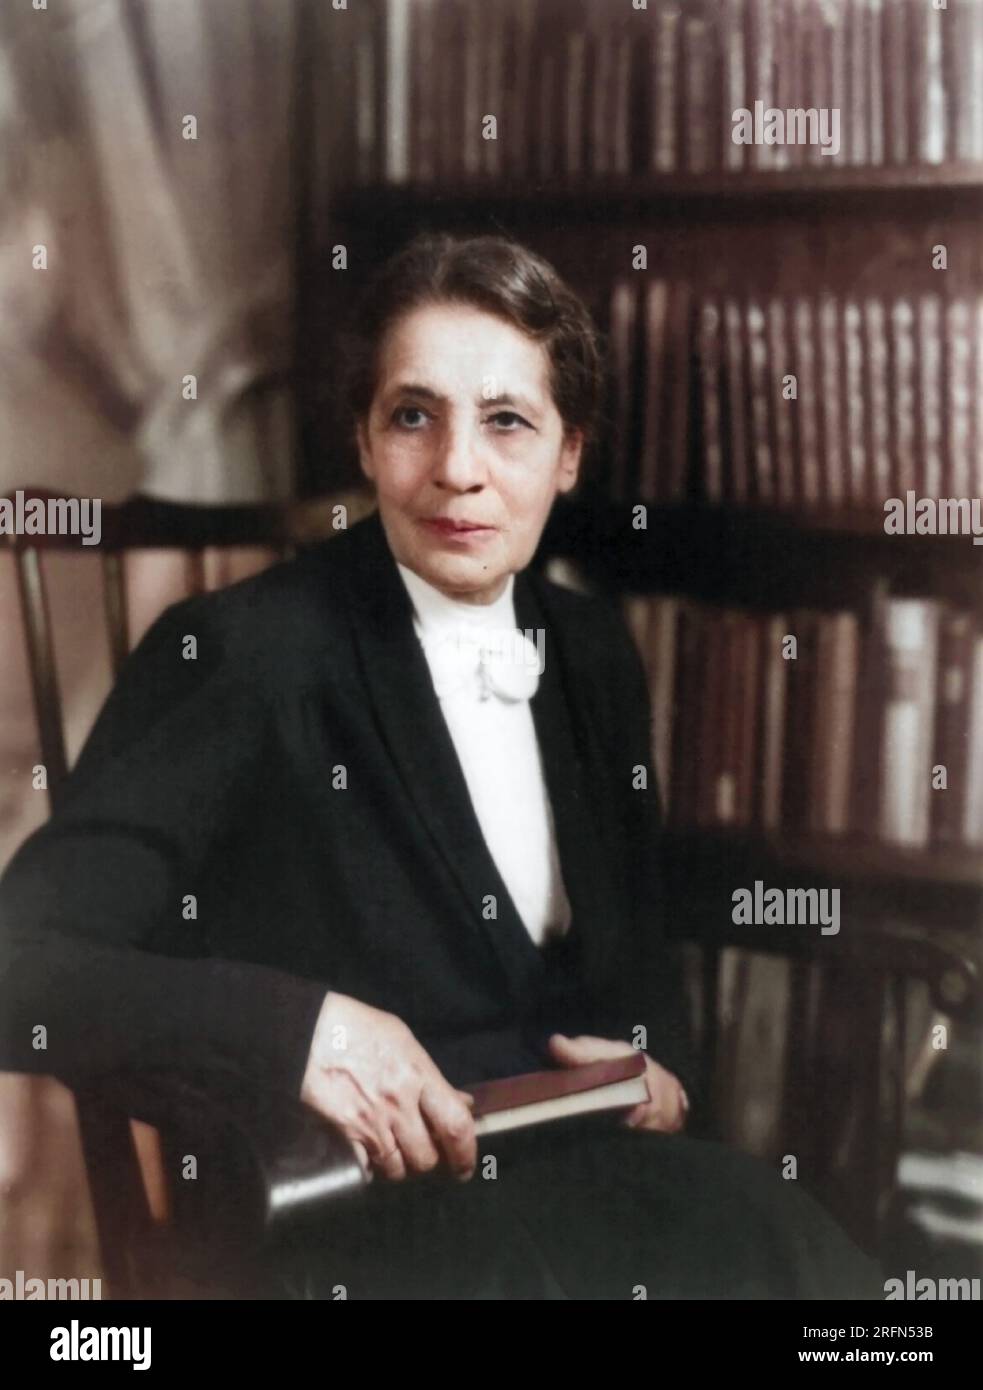 Lise Meitner (1878-1968) was an Austrian physicist who discovered nuclear fission. This discovery led to the construction of the first atomic bomb during World War II. Meitner, who was Jewish, fled Nazi Germany for Sweden in 1938. Her fellow scientist Otto Hahn won the 1944 Nobel Prize for Chemistry for nuclear fission, but she did not share in the award, which many found unfair. Photo taken between 1940 and 1960. Stock Photo